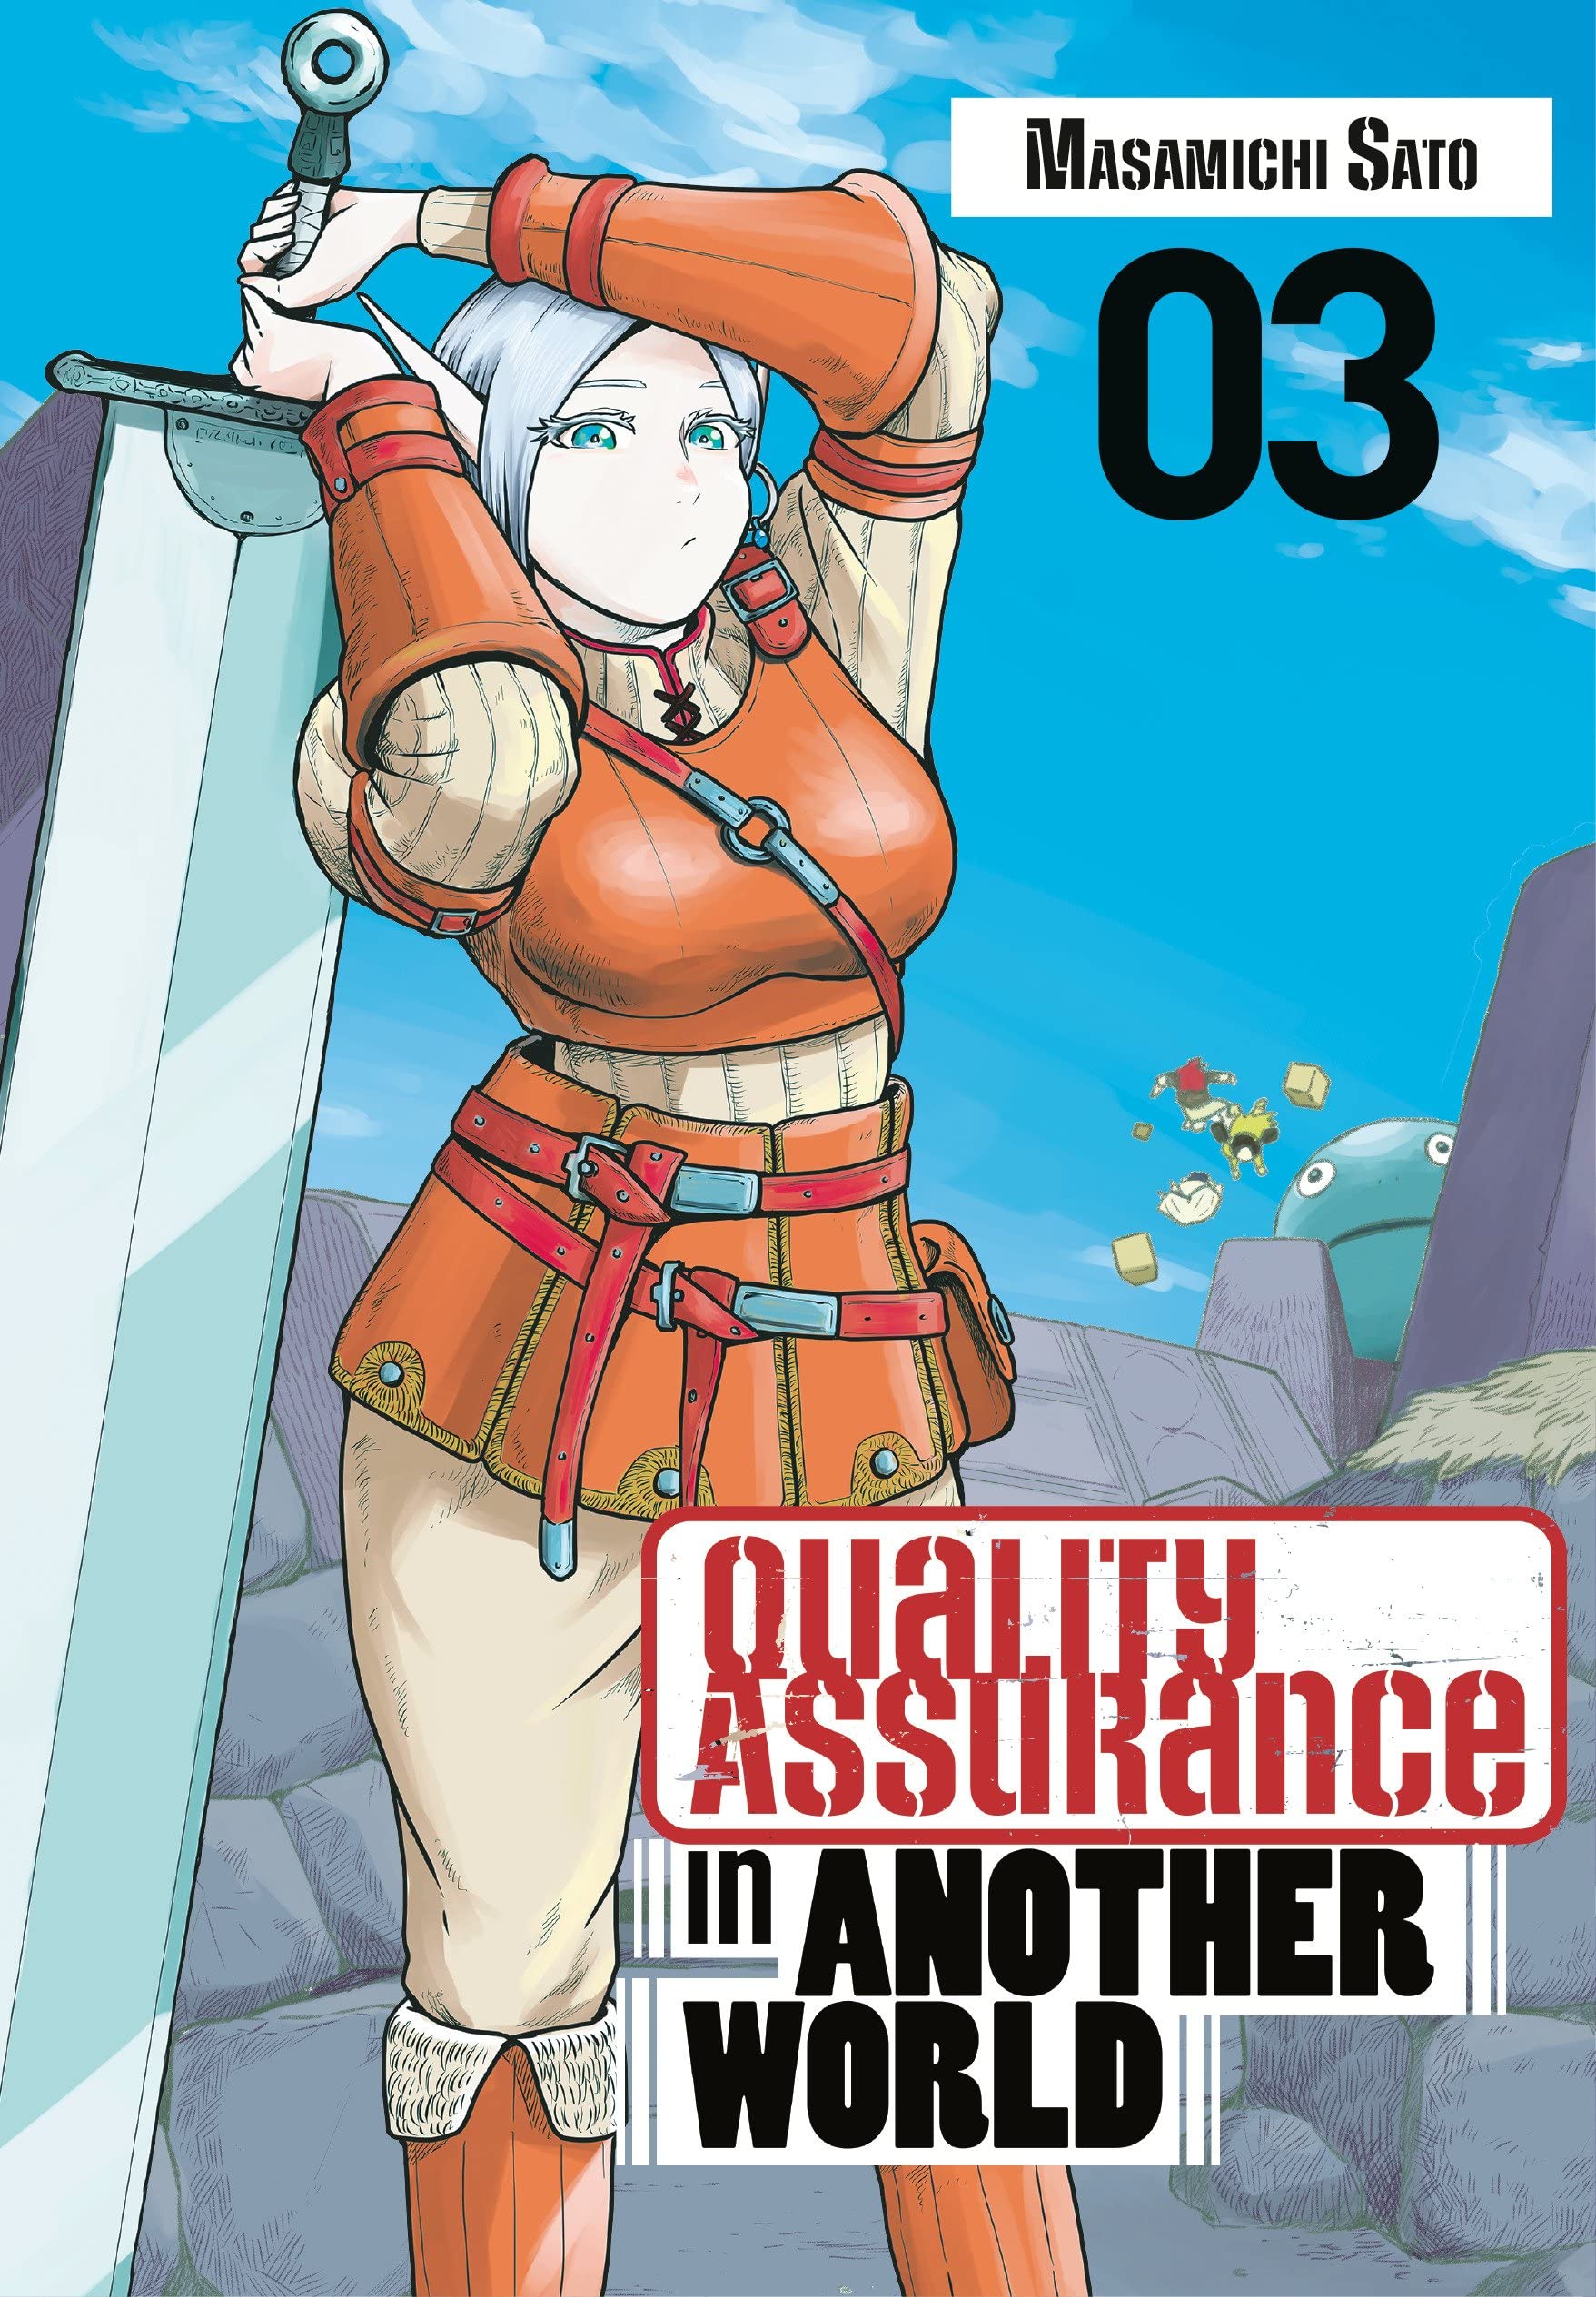 Quality Assurance in Another World Vol. 03